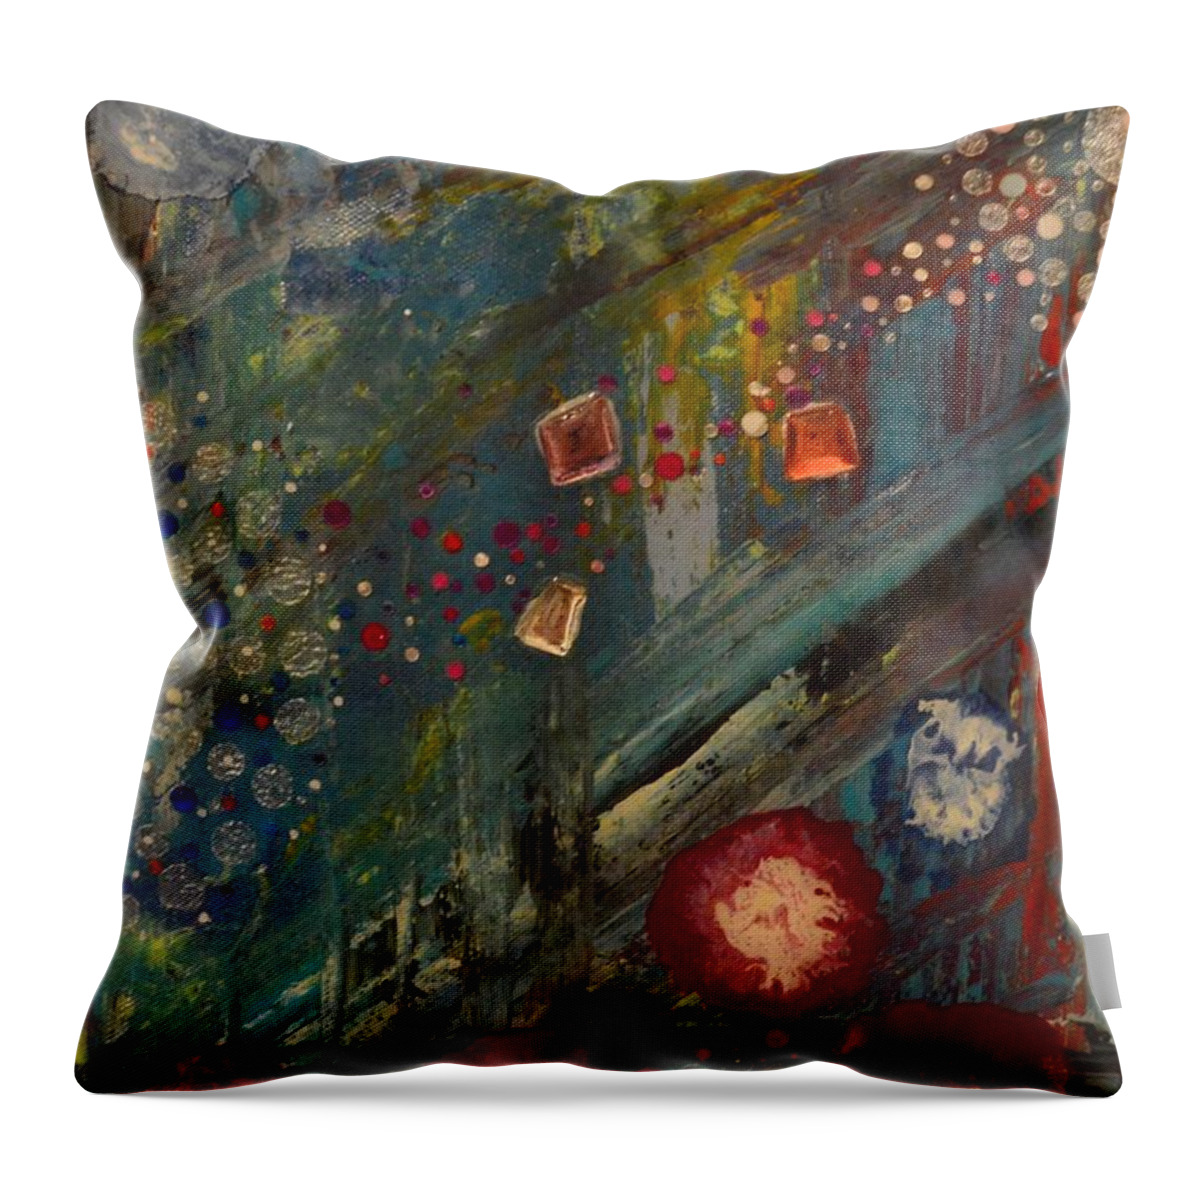 Fox Throw Pillow featuring the painting The Owl The Fox and The Poppies by MiMi Stirn